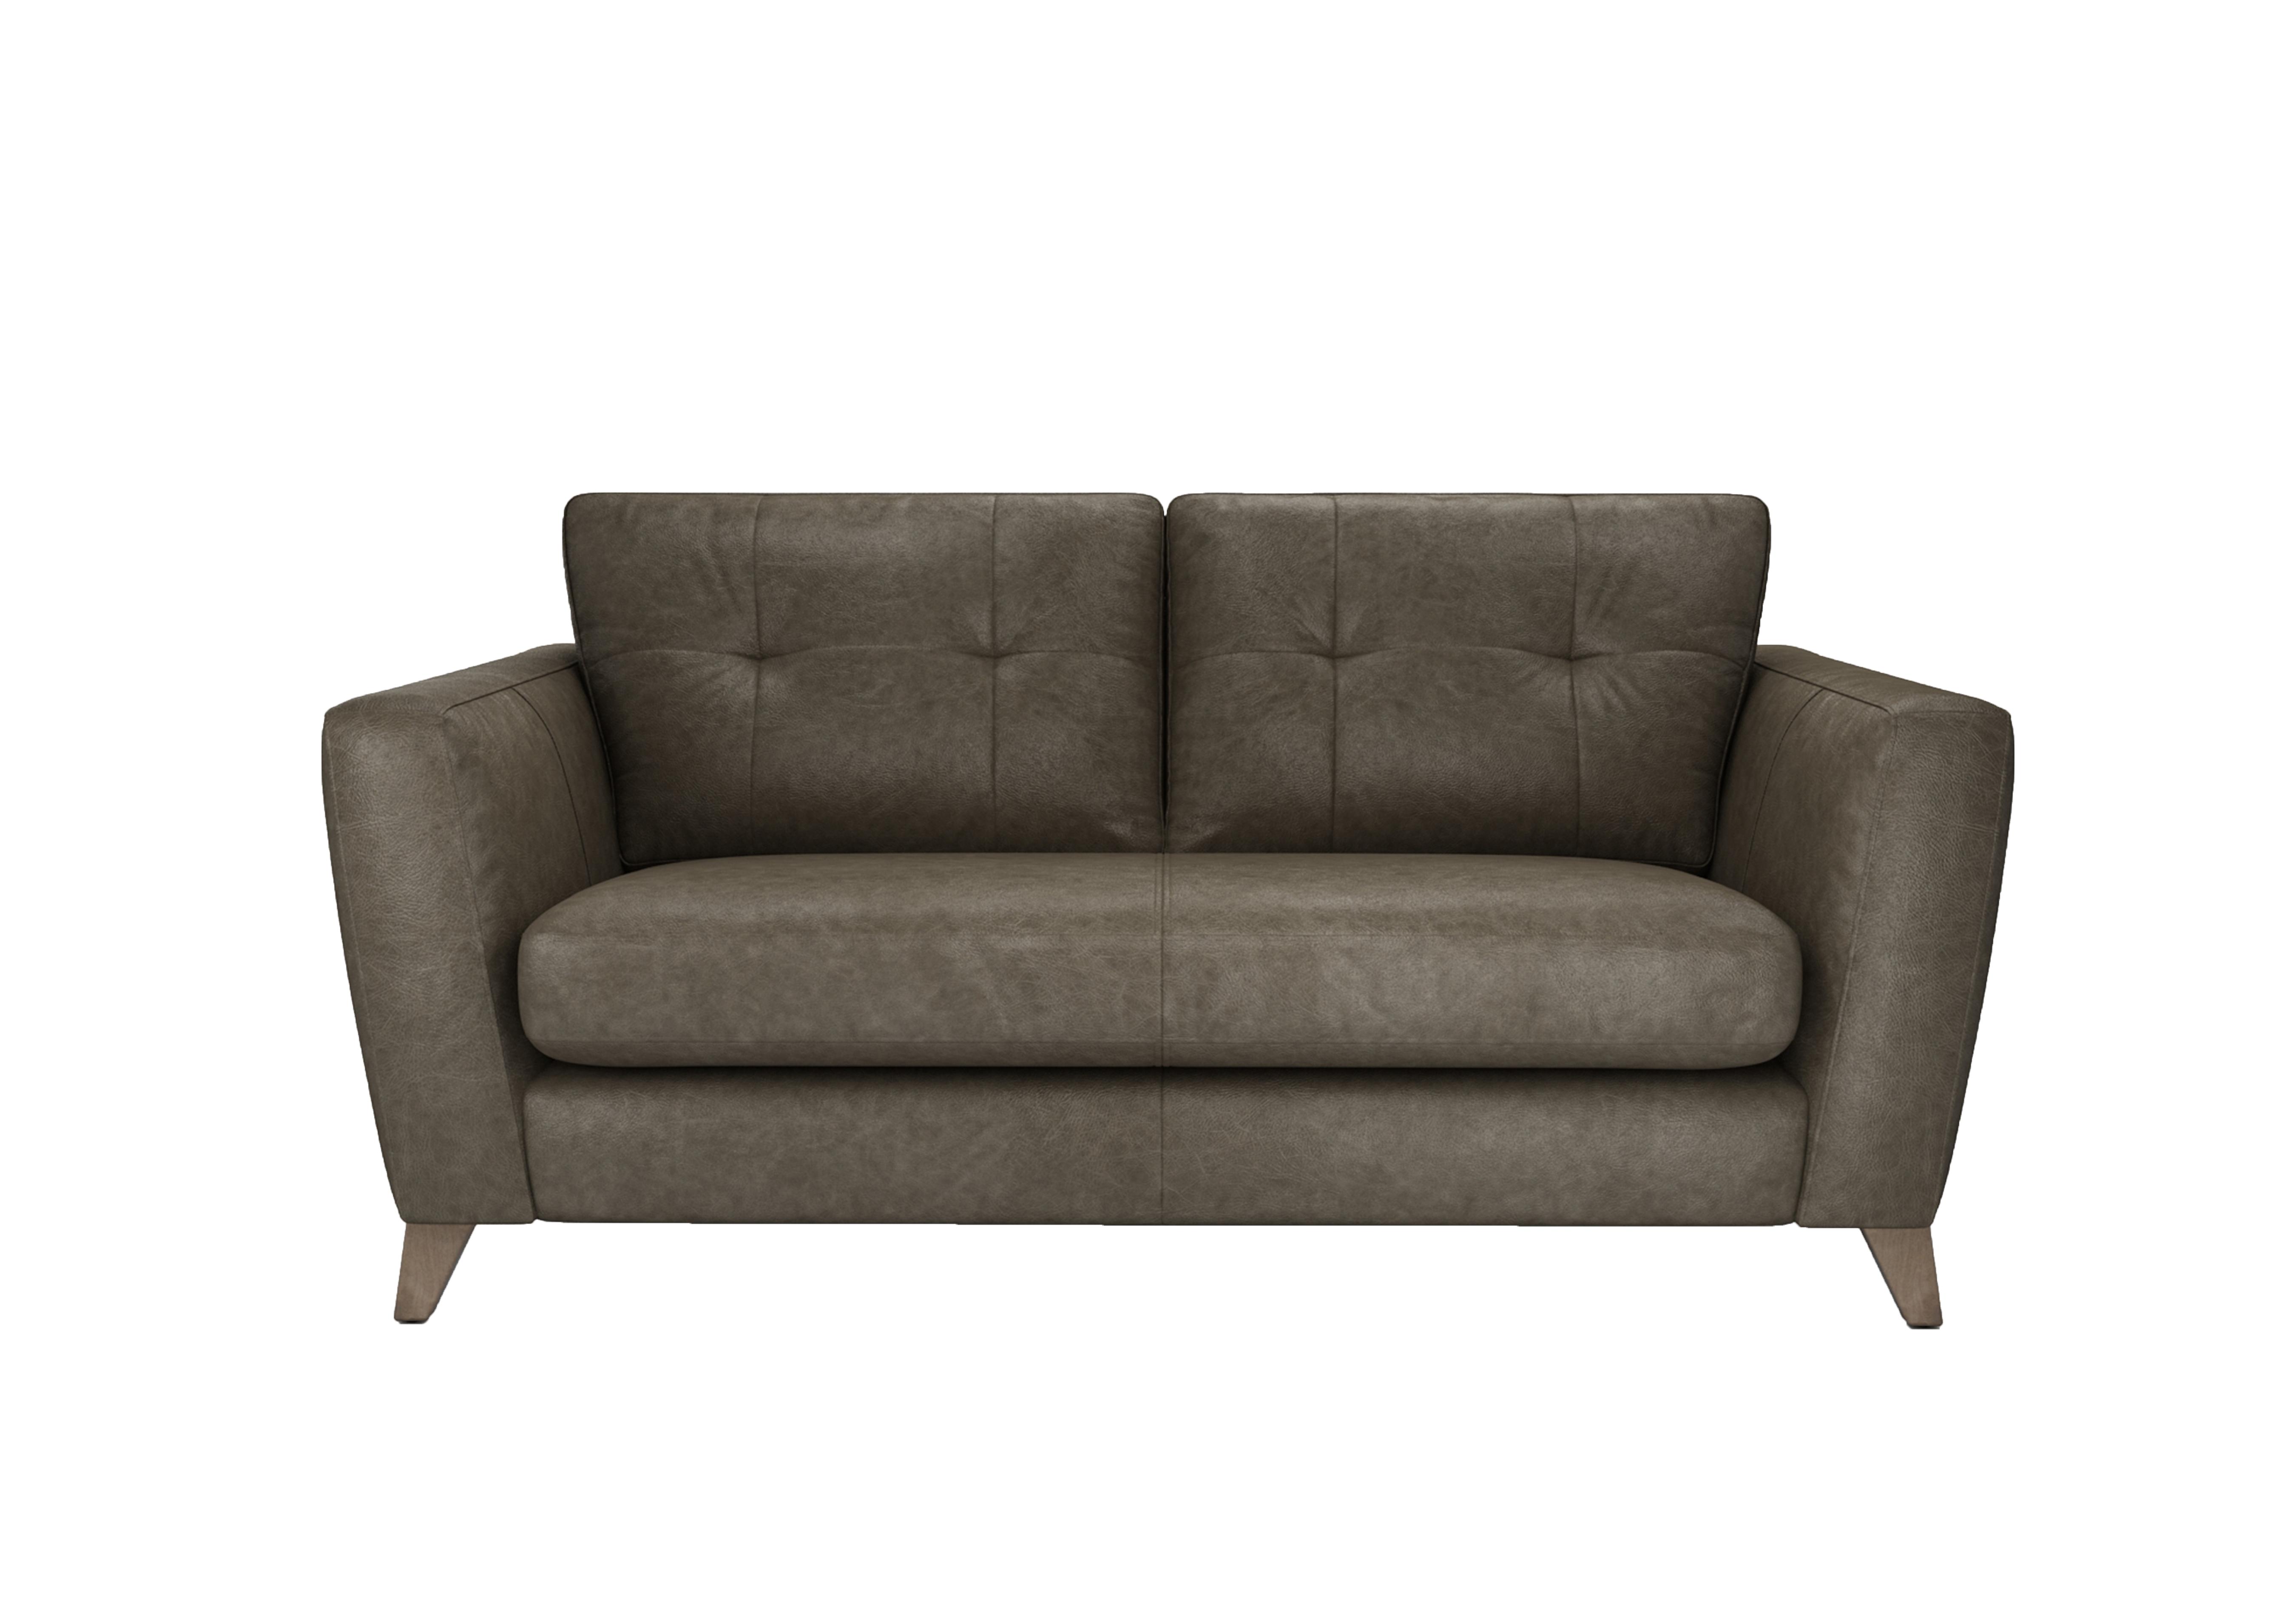 Hermione 2.5 Seater Leather Sofa in Gra189 Granite Wo Ft on Furniture Village